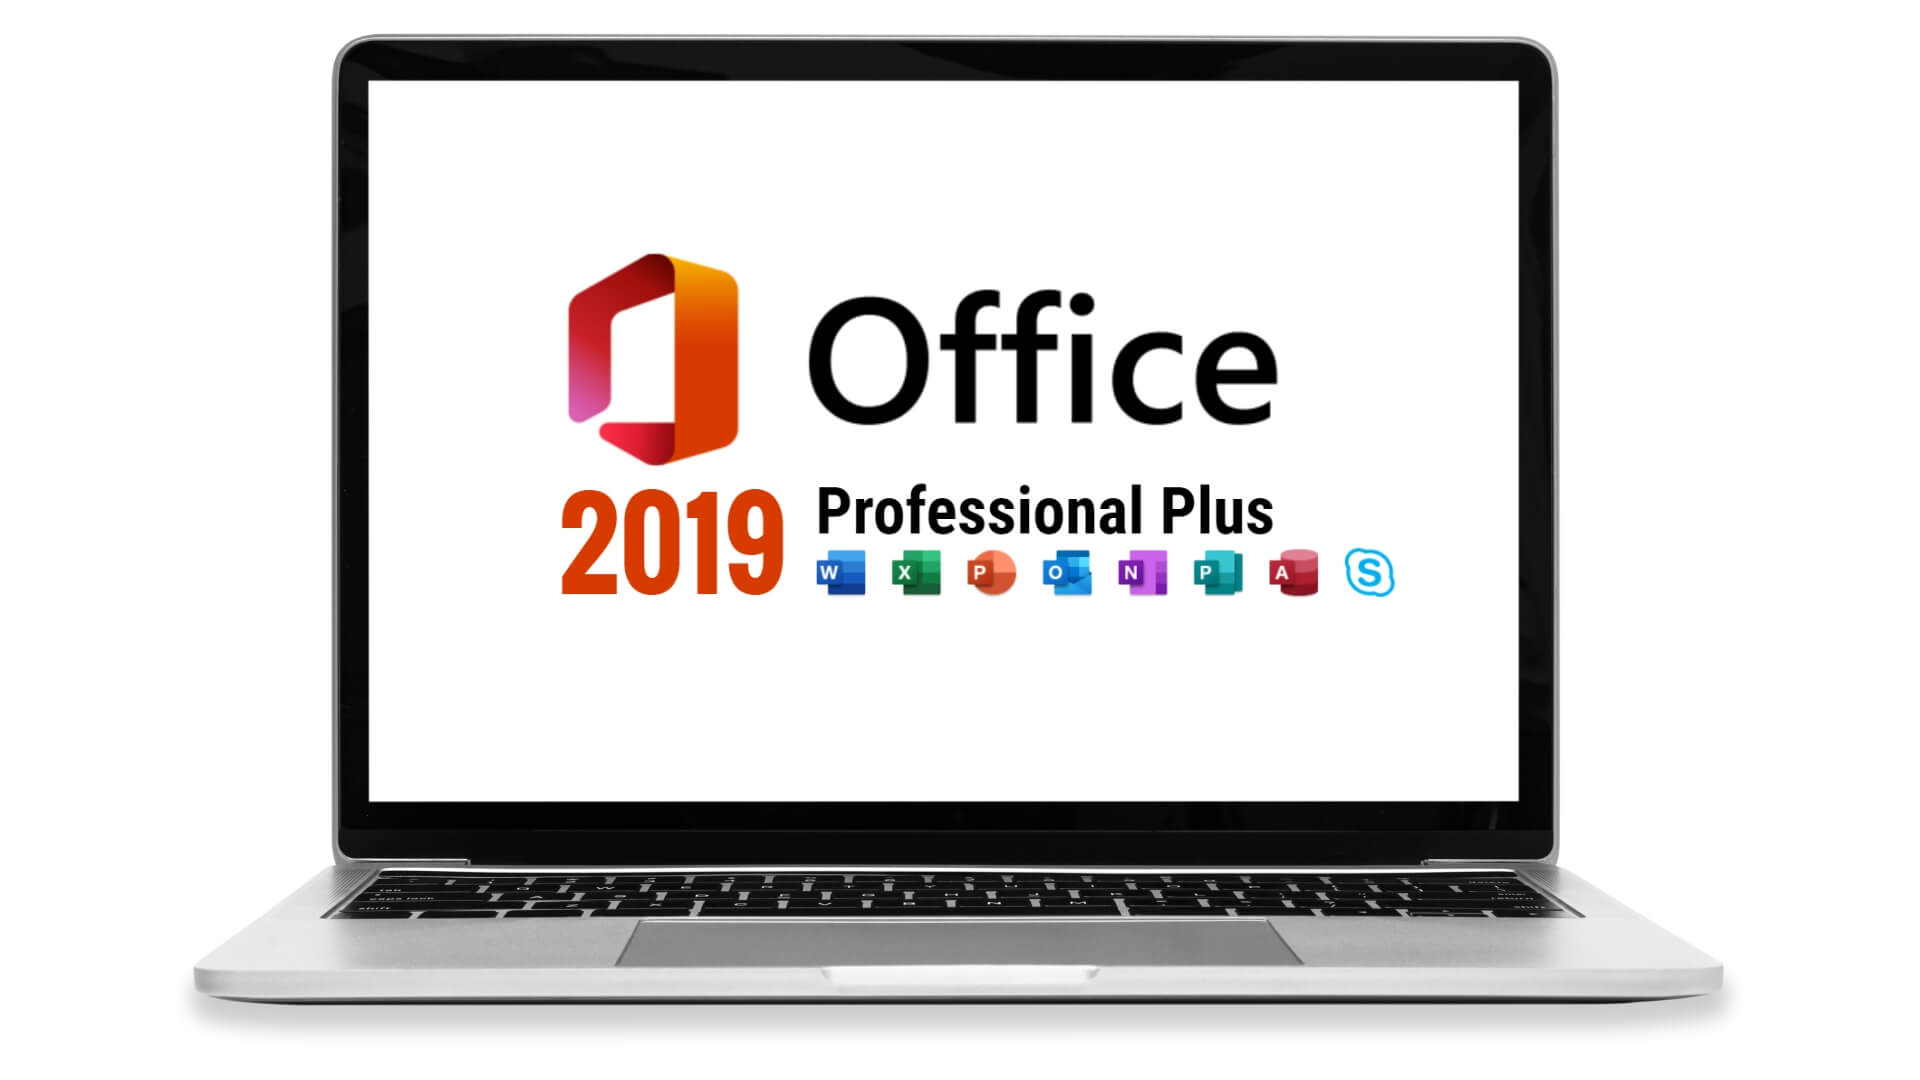 Security of Office 2019 Pro Plus